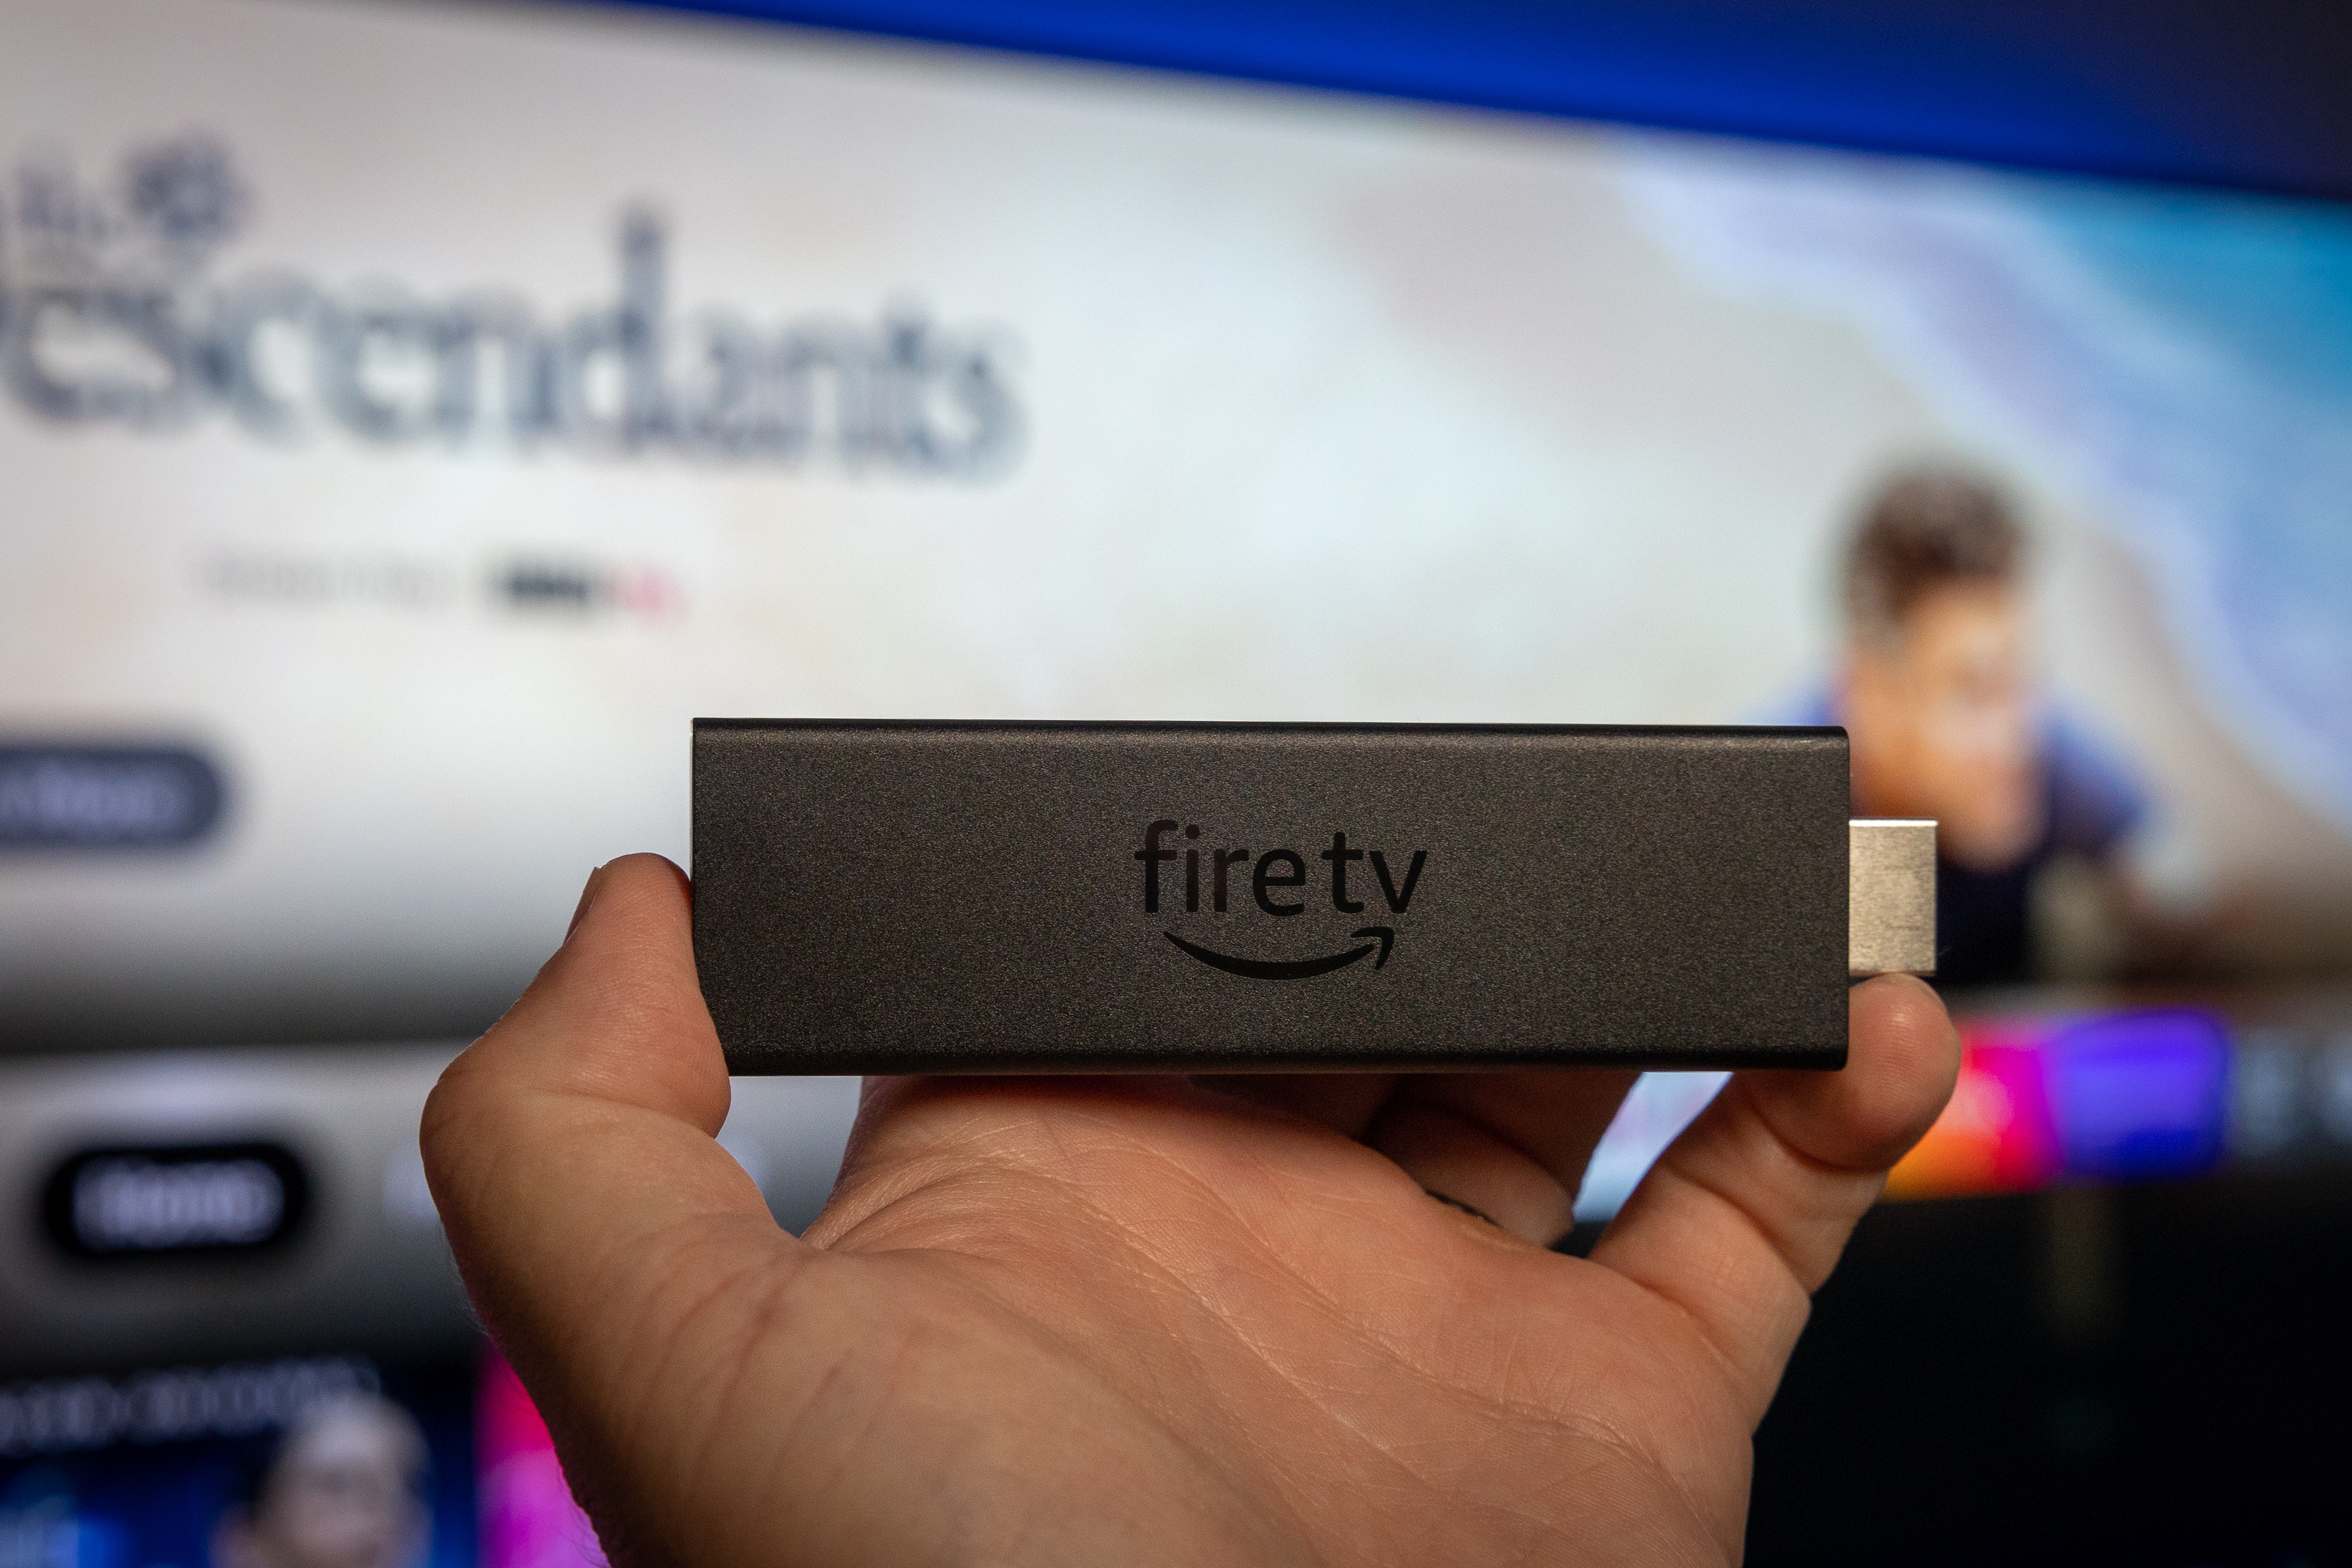 Plug, Connect & View – Installation Process for  Fire TV